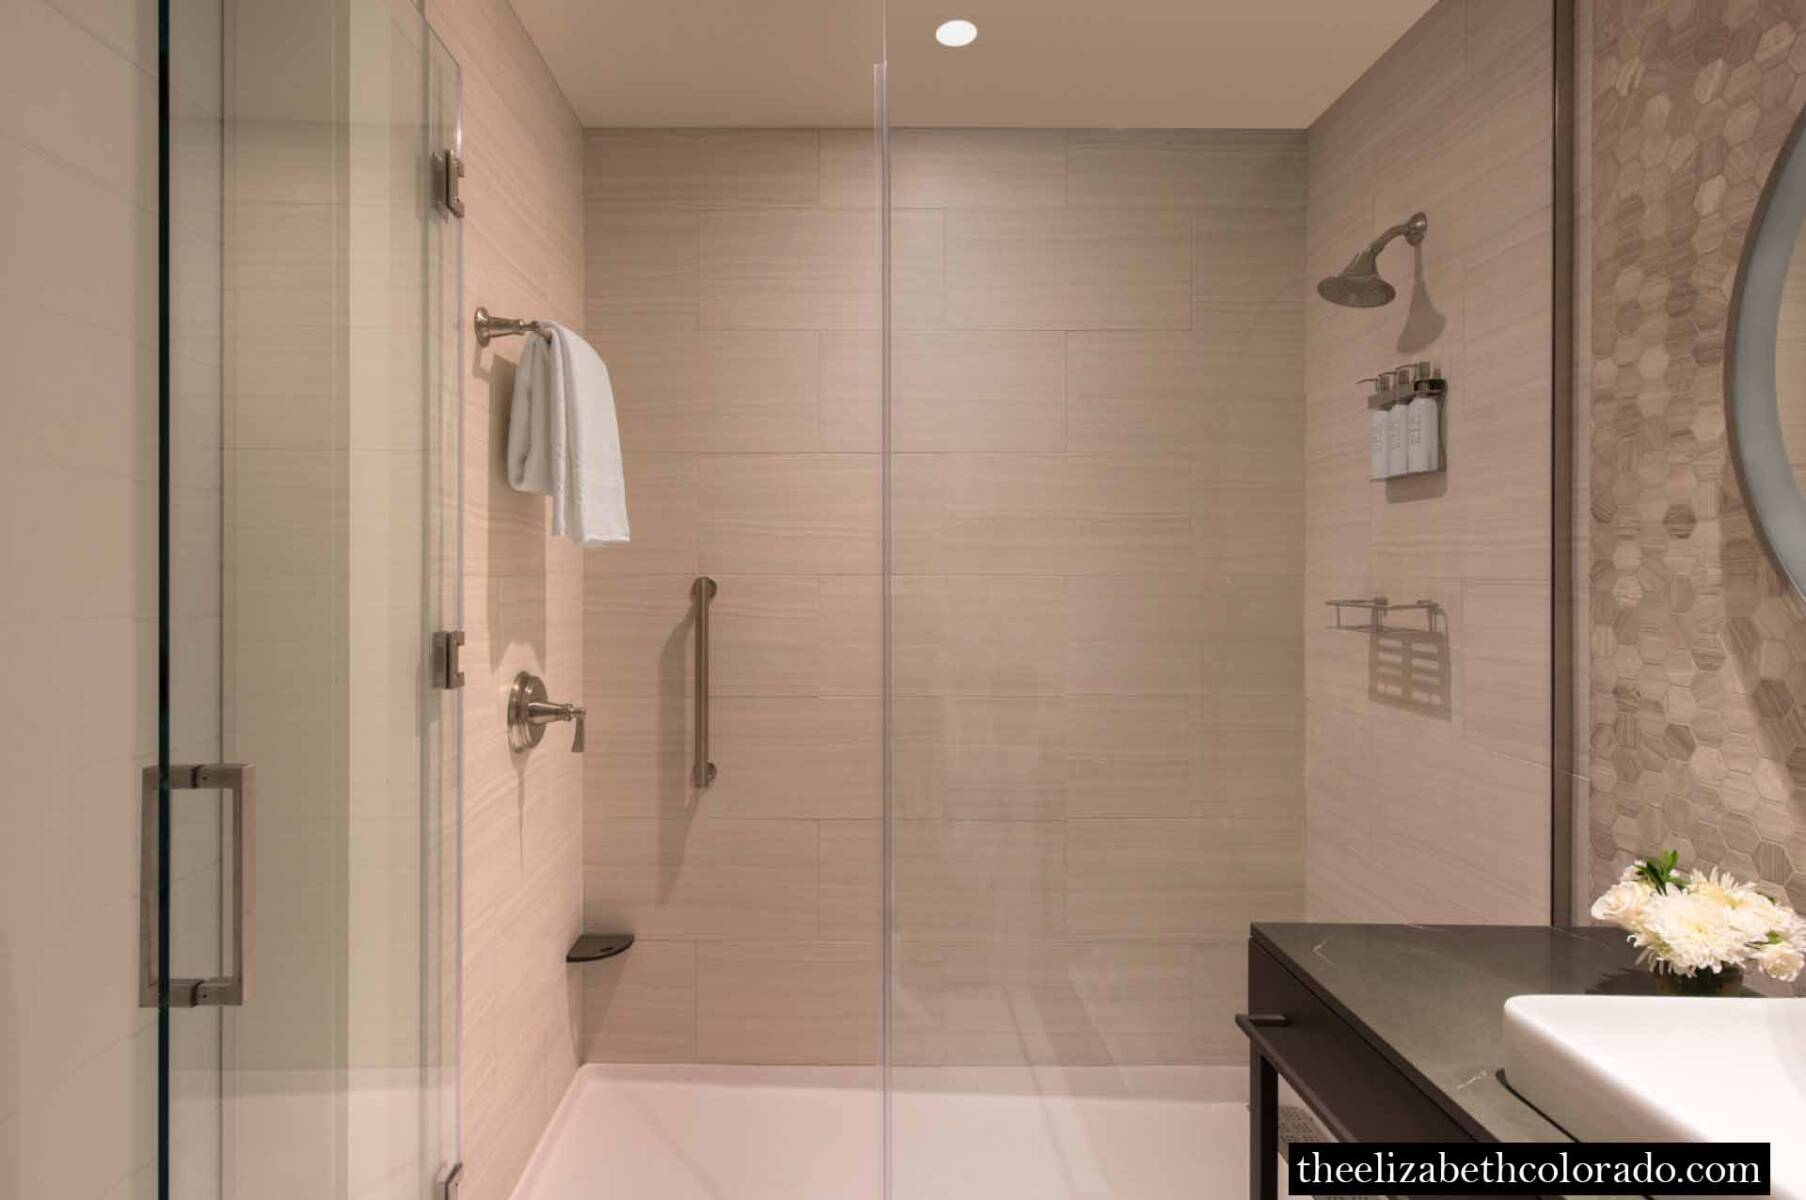 Spacious guest bathroom shower with soothing cream tile from floor to ceiling.